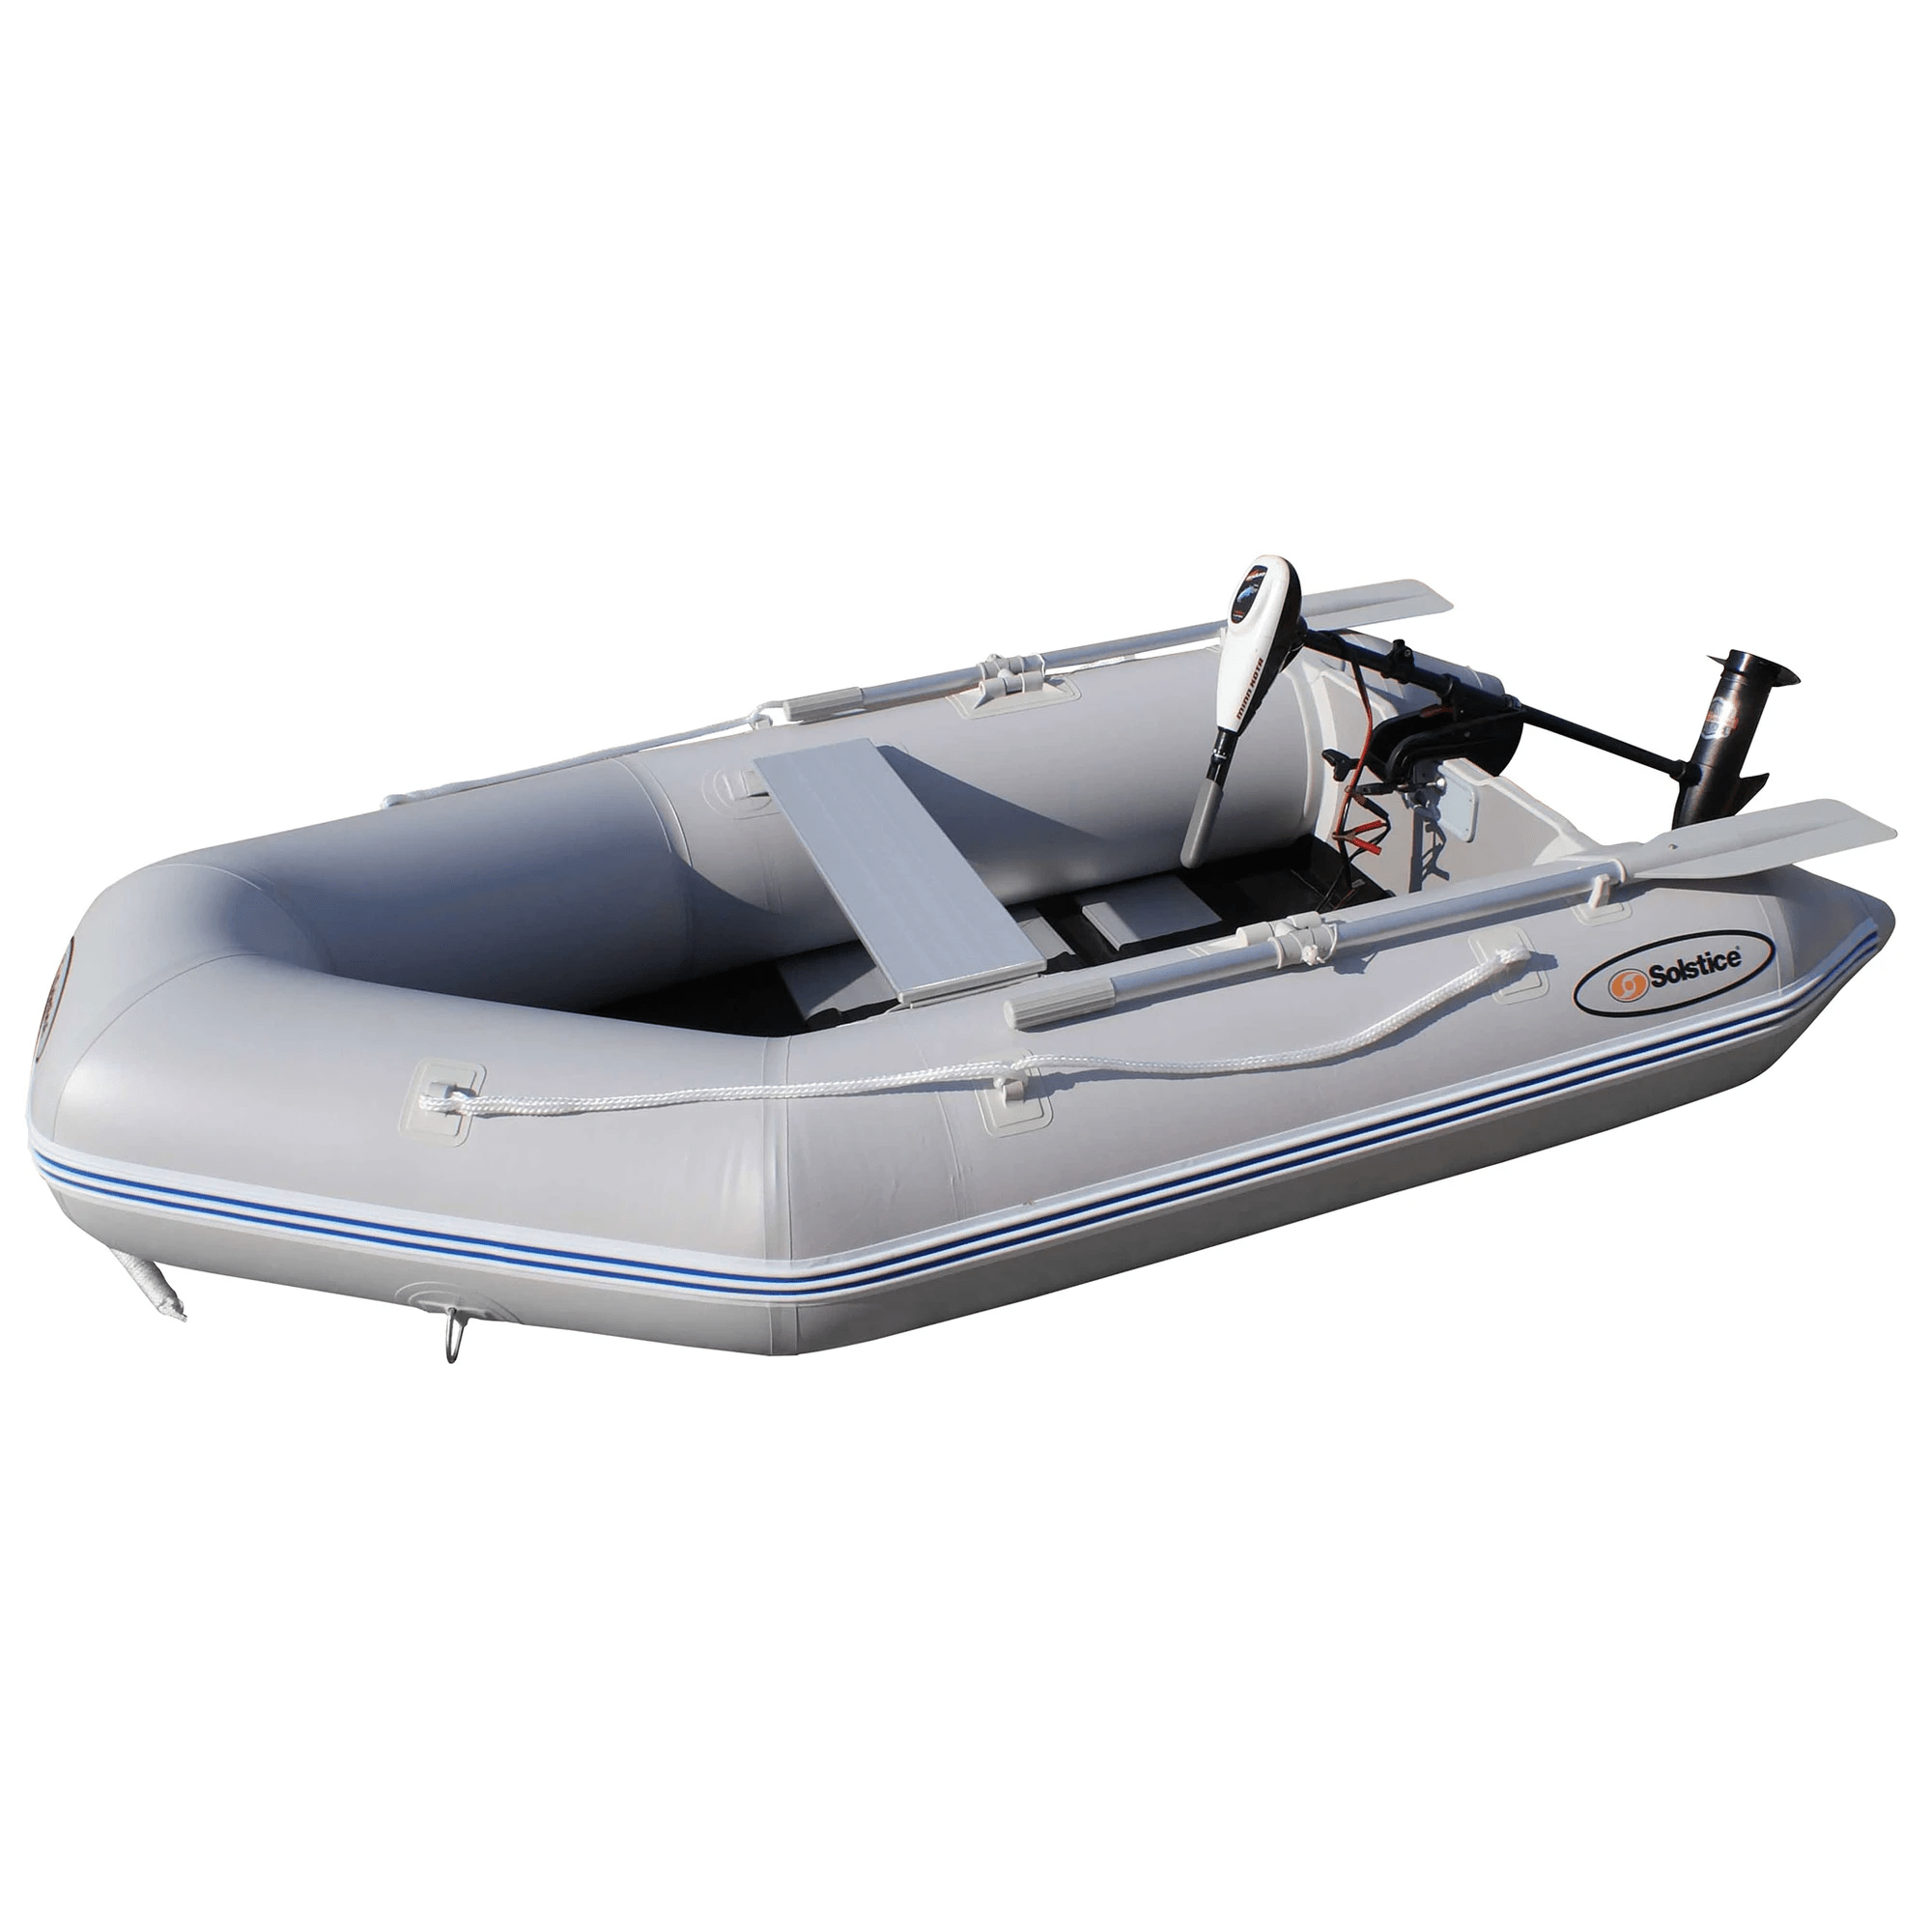 Solstice Outdoorsman 9000 4 Person Fishing Boat